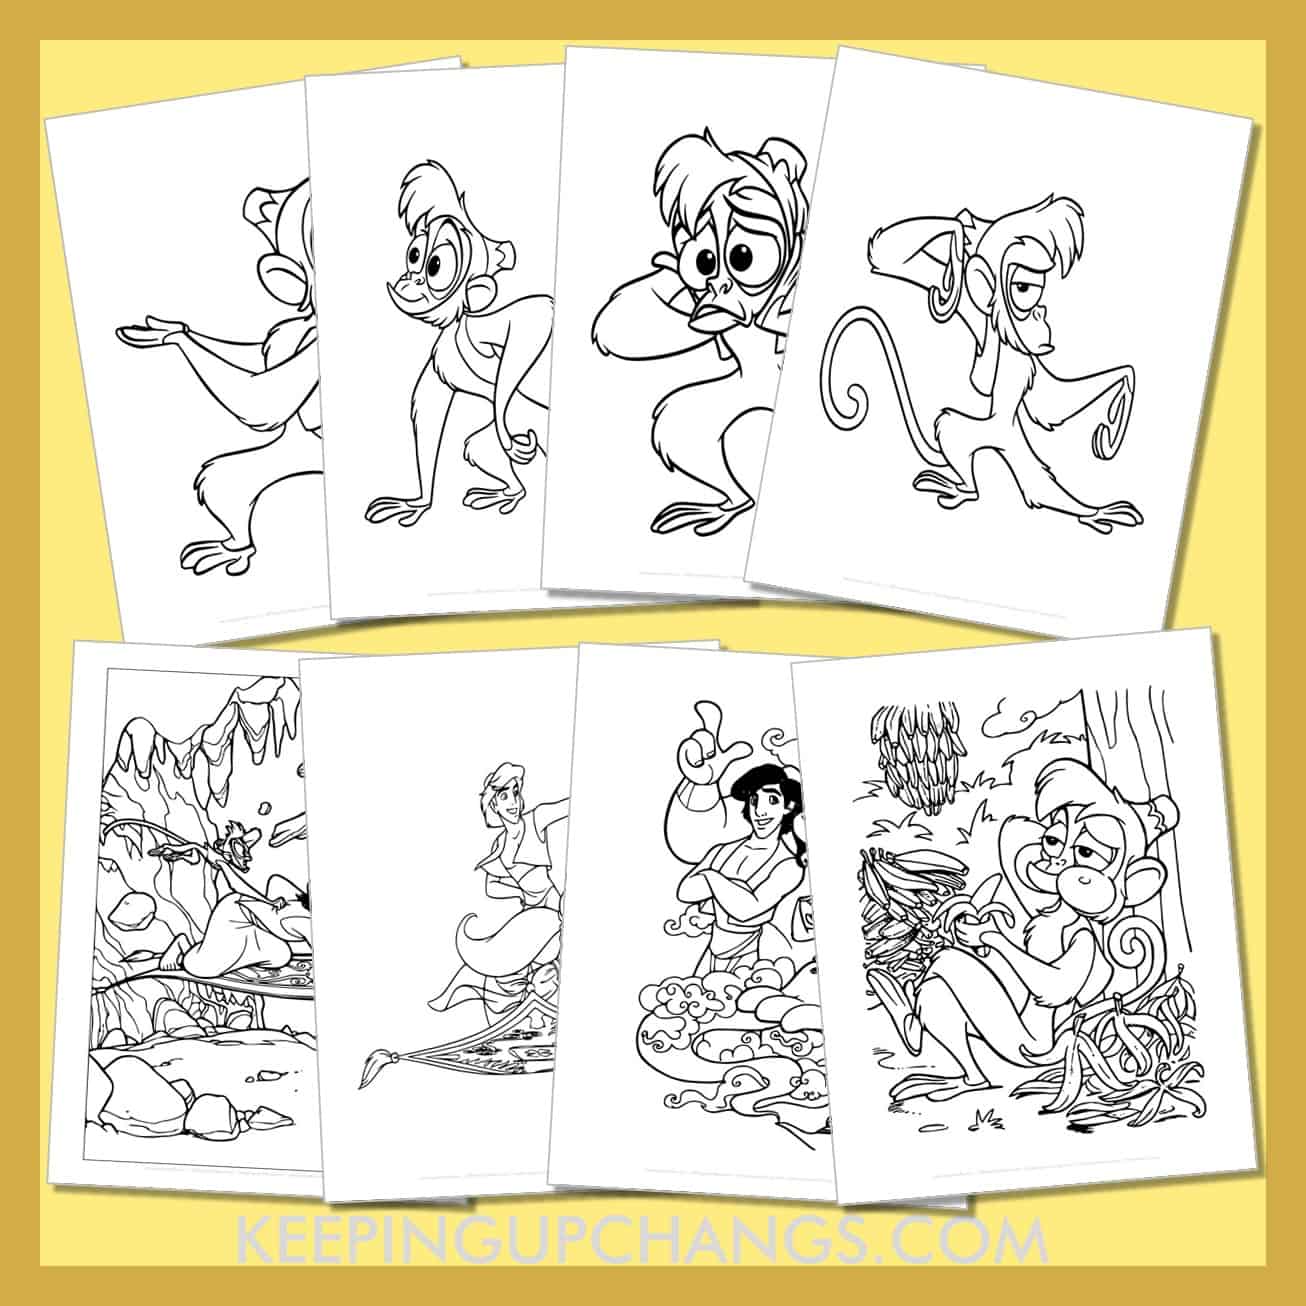 free abu monkey pictures to color for toddlers, kids, adults.